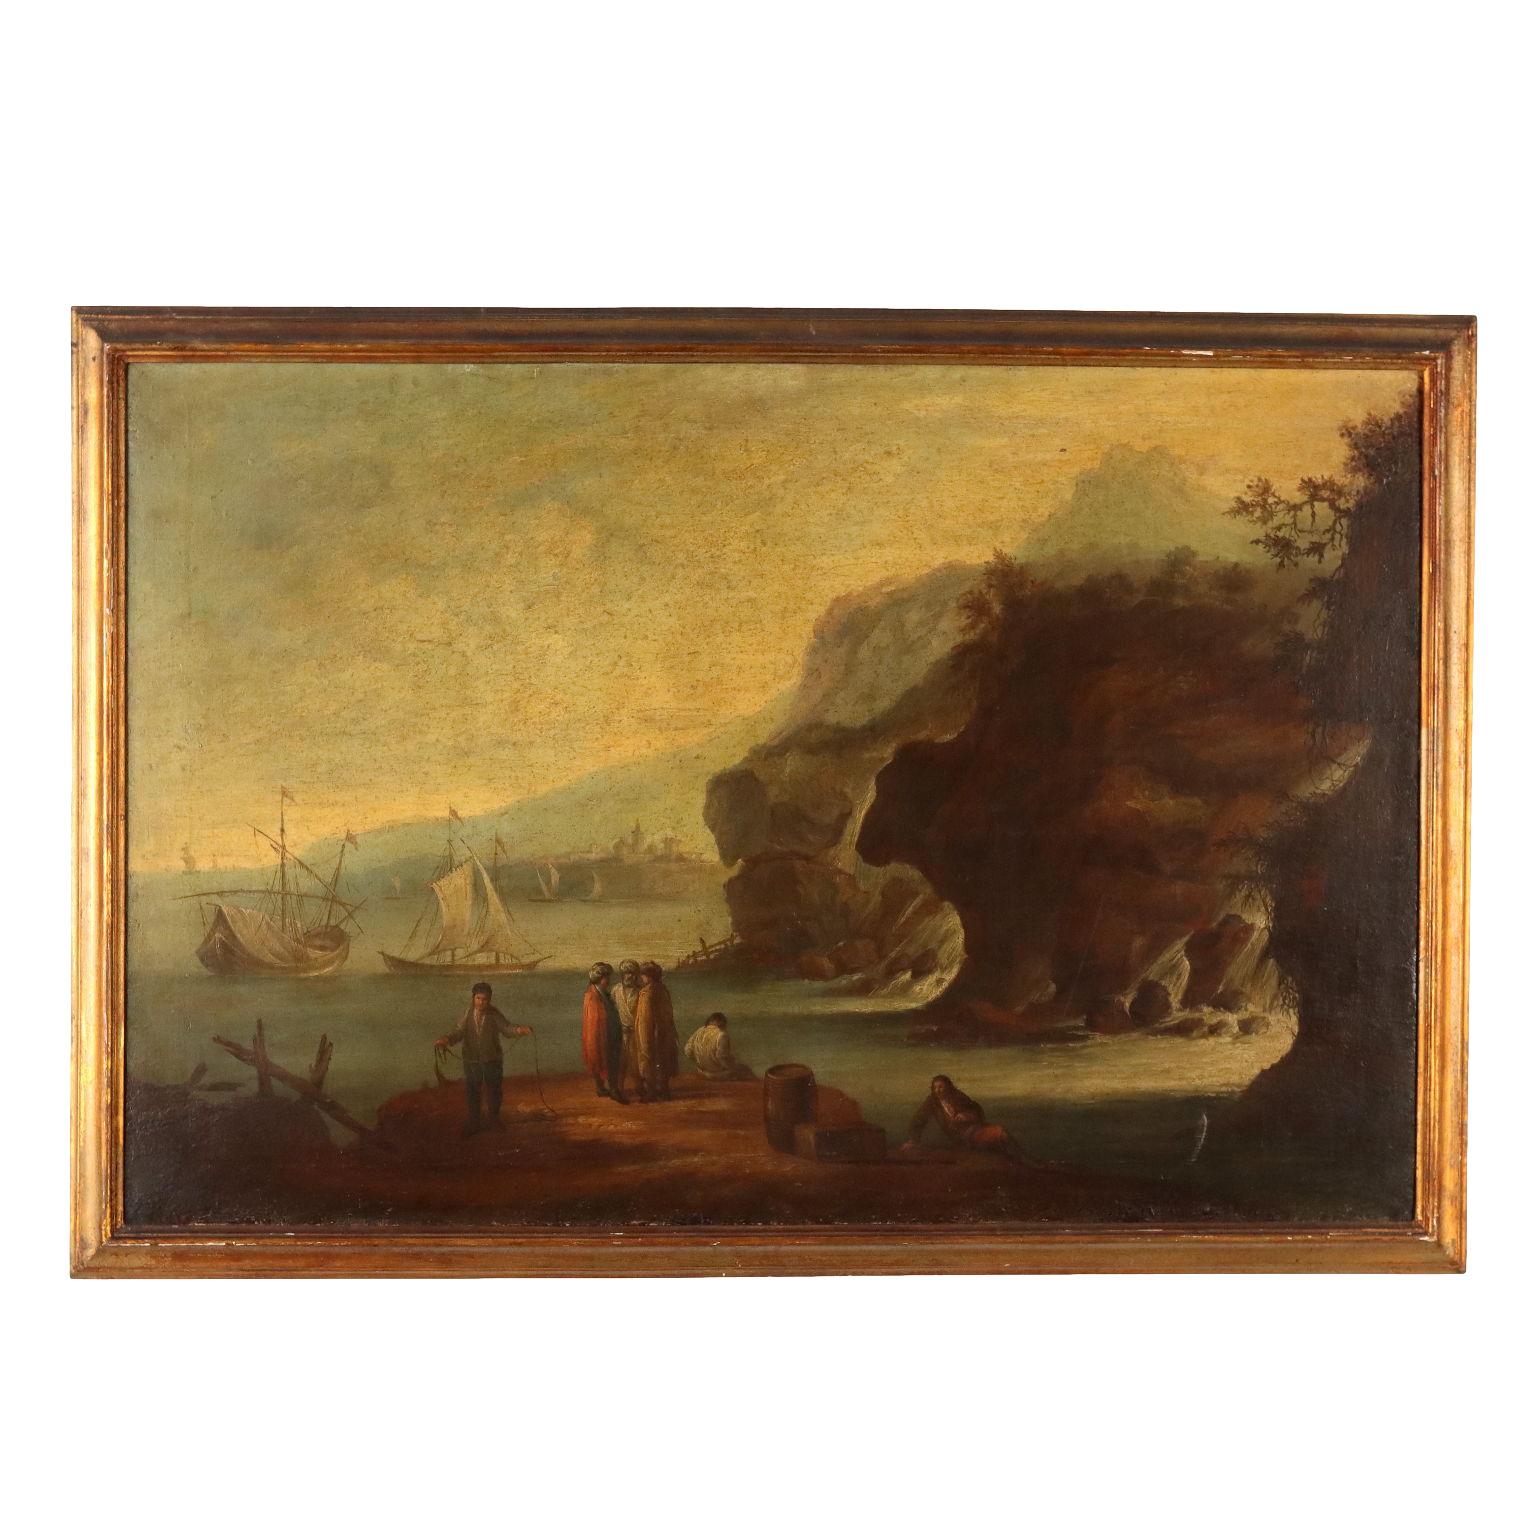 Unknown Landscape Painting - Seascape with Figures Oil on canvas '700 